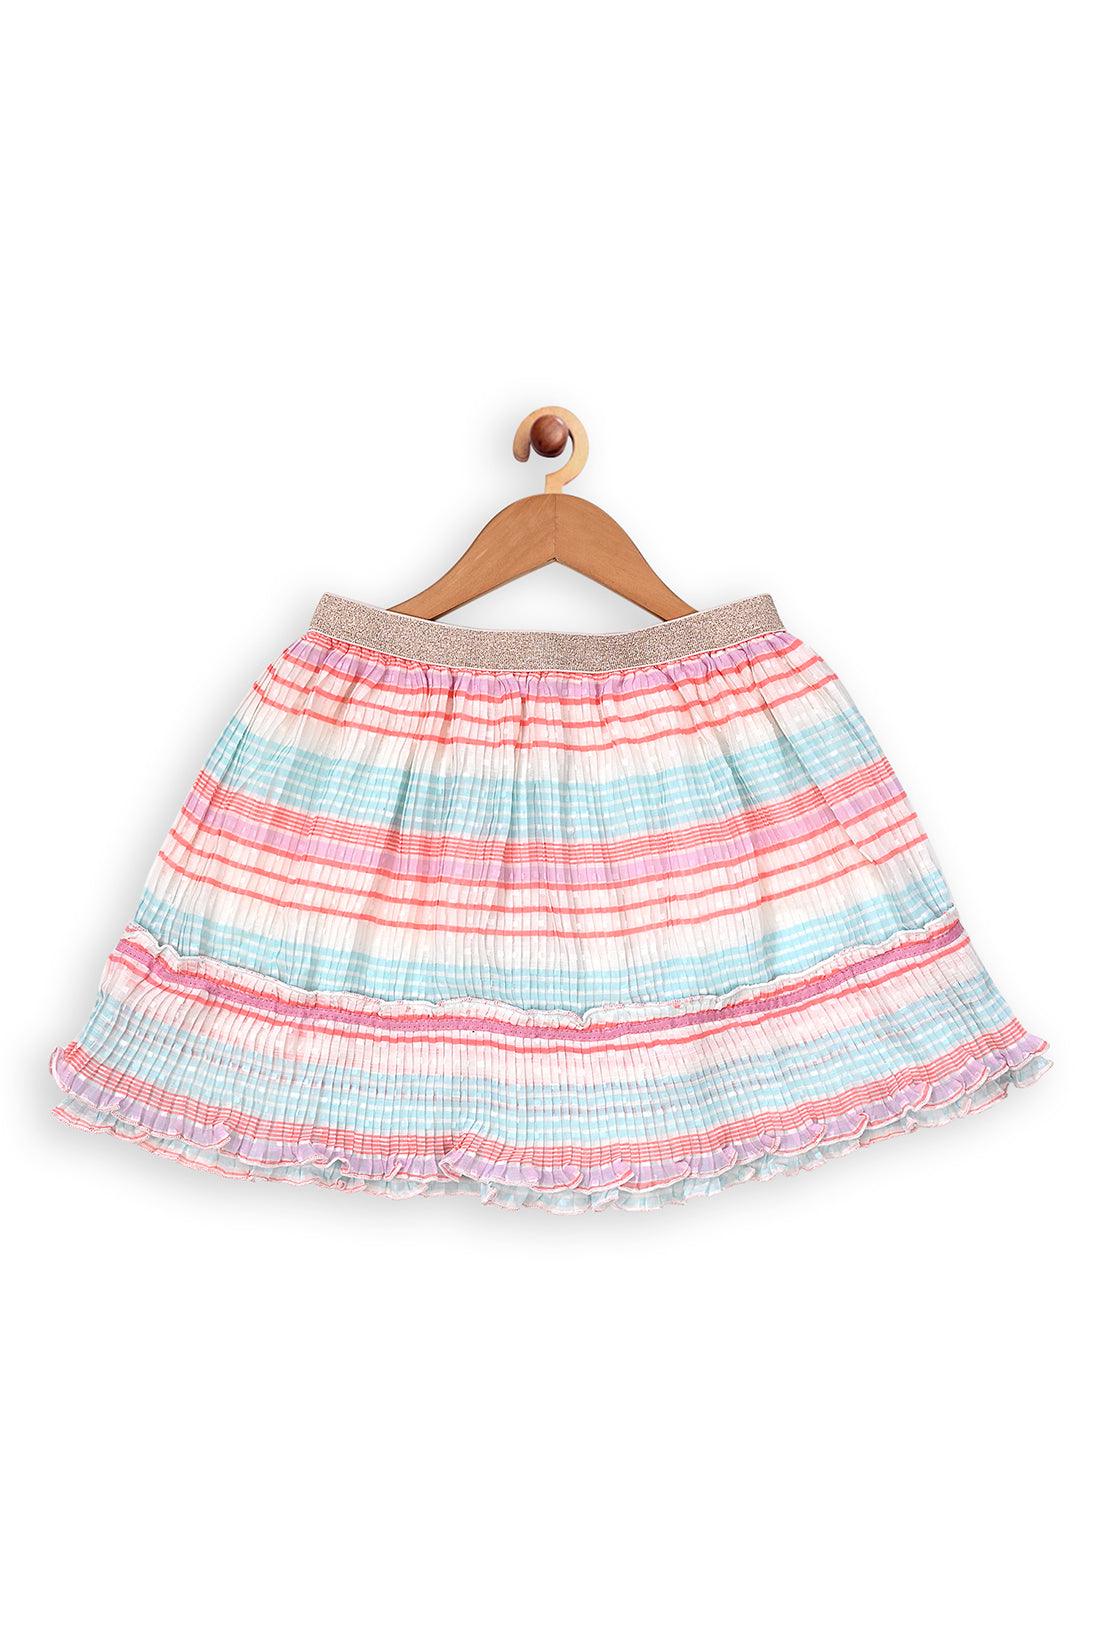 One Friday Kids Girls Multicolor Pleated Skirt - One Friday World